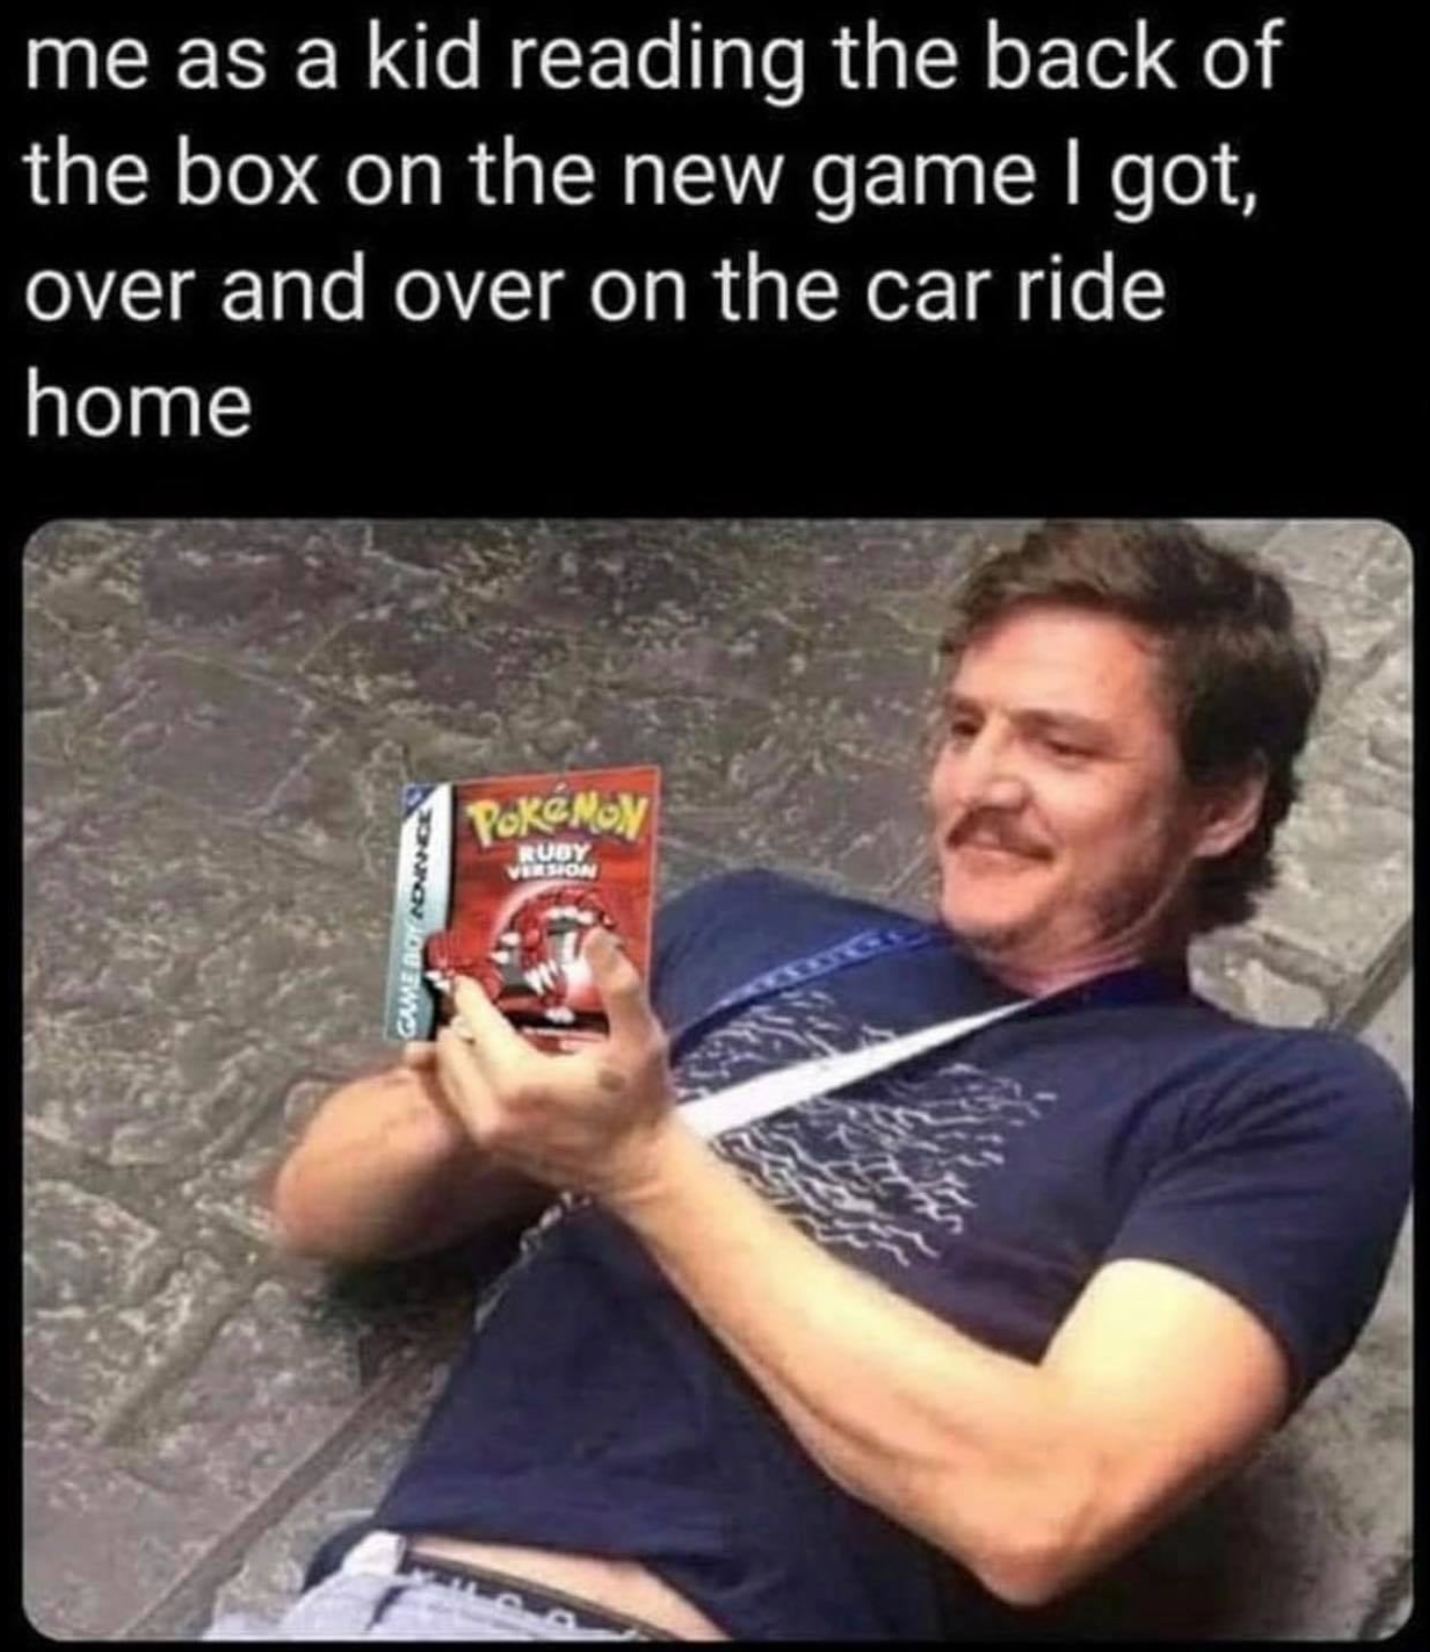 funny gaming memes - monosodium glutamate meme - me as a kid reading the back of the box on the new game I got, over and over on the car ride home Pokemon